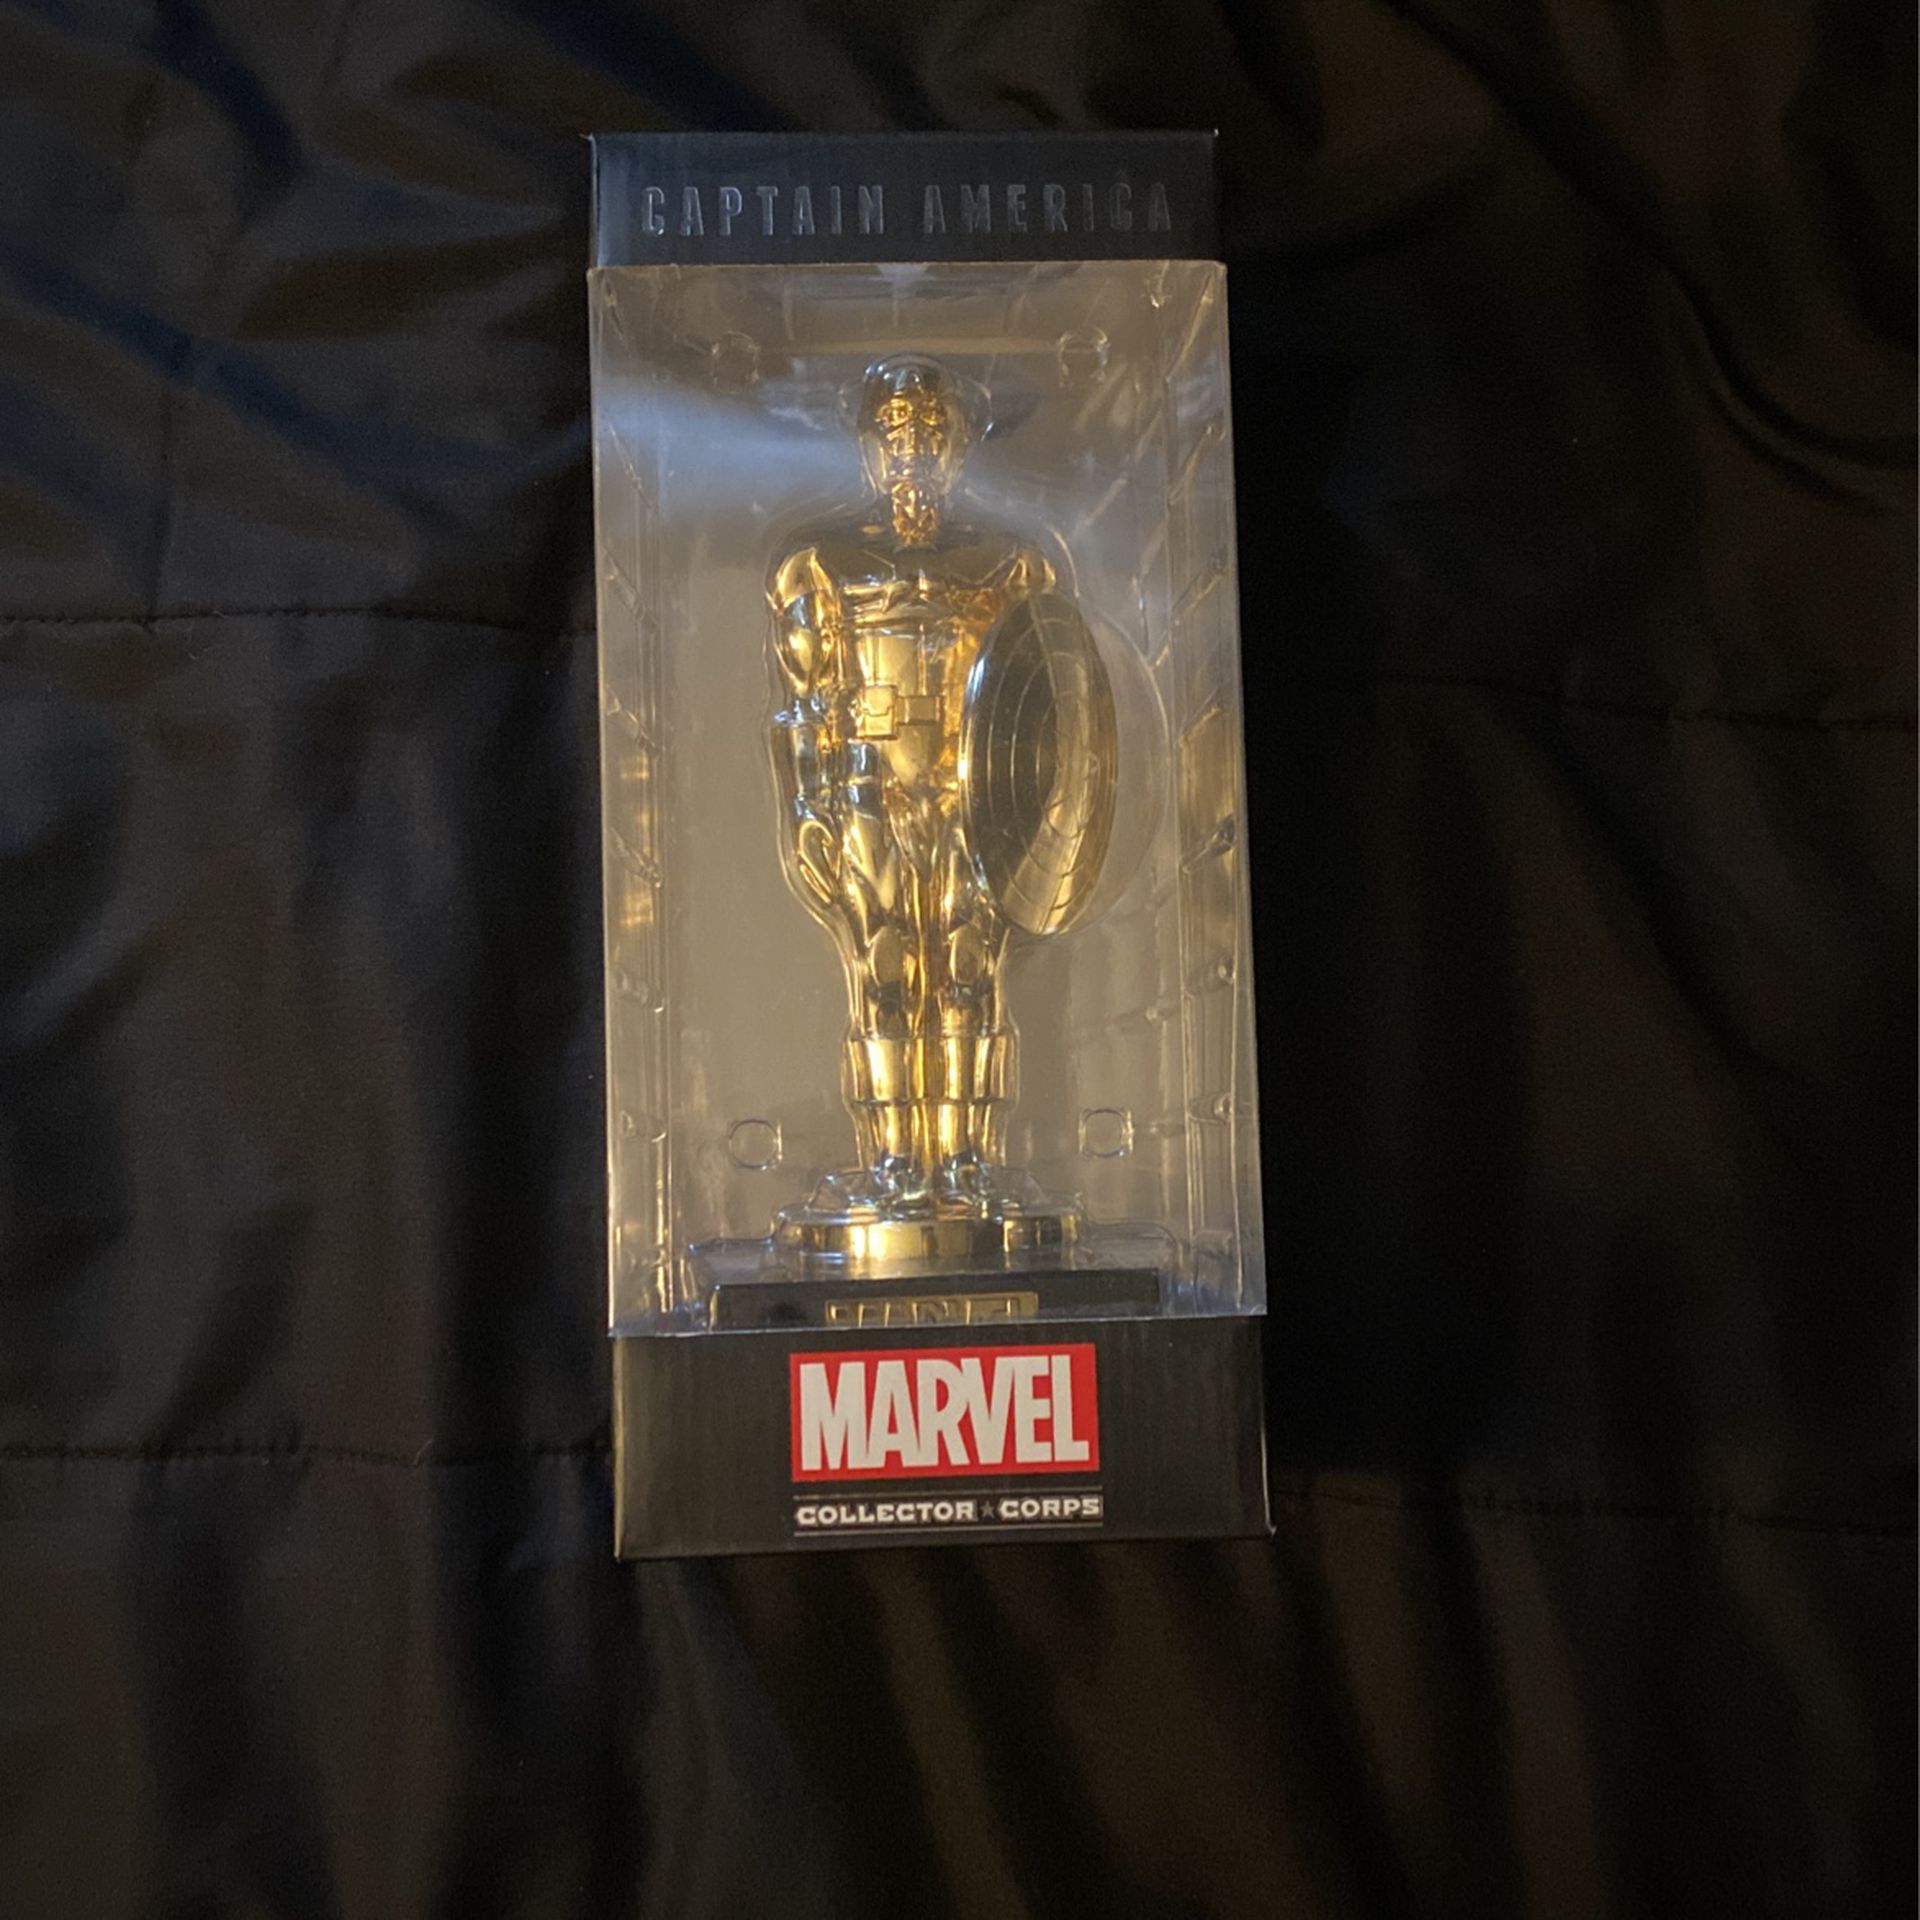 Marvel Collector Corps Captain America